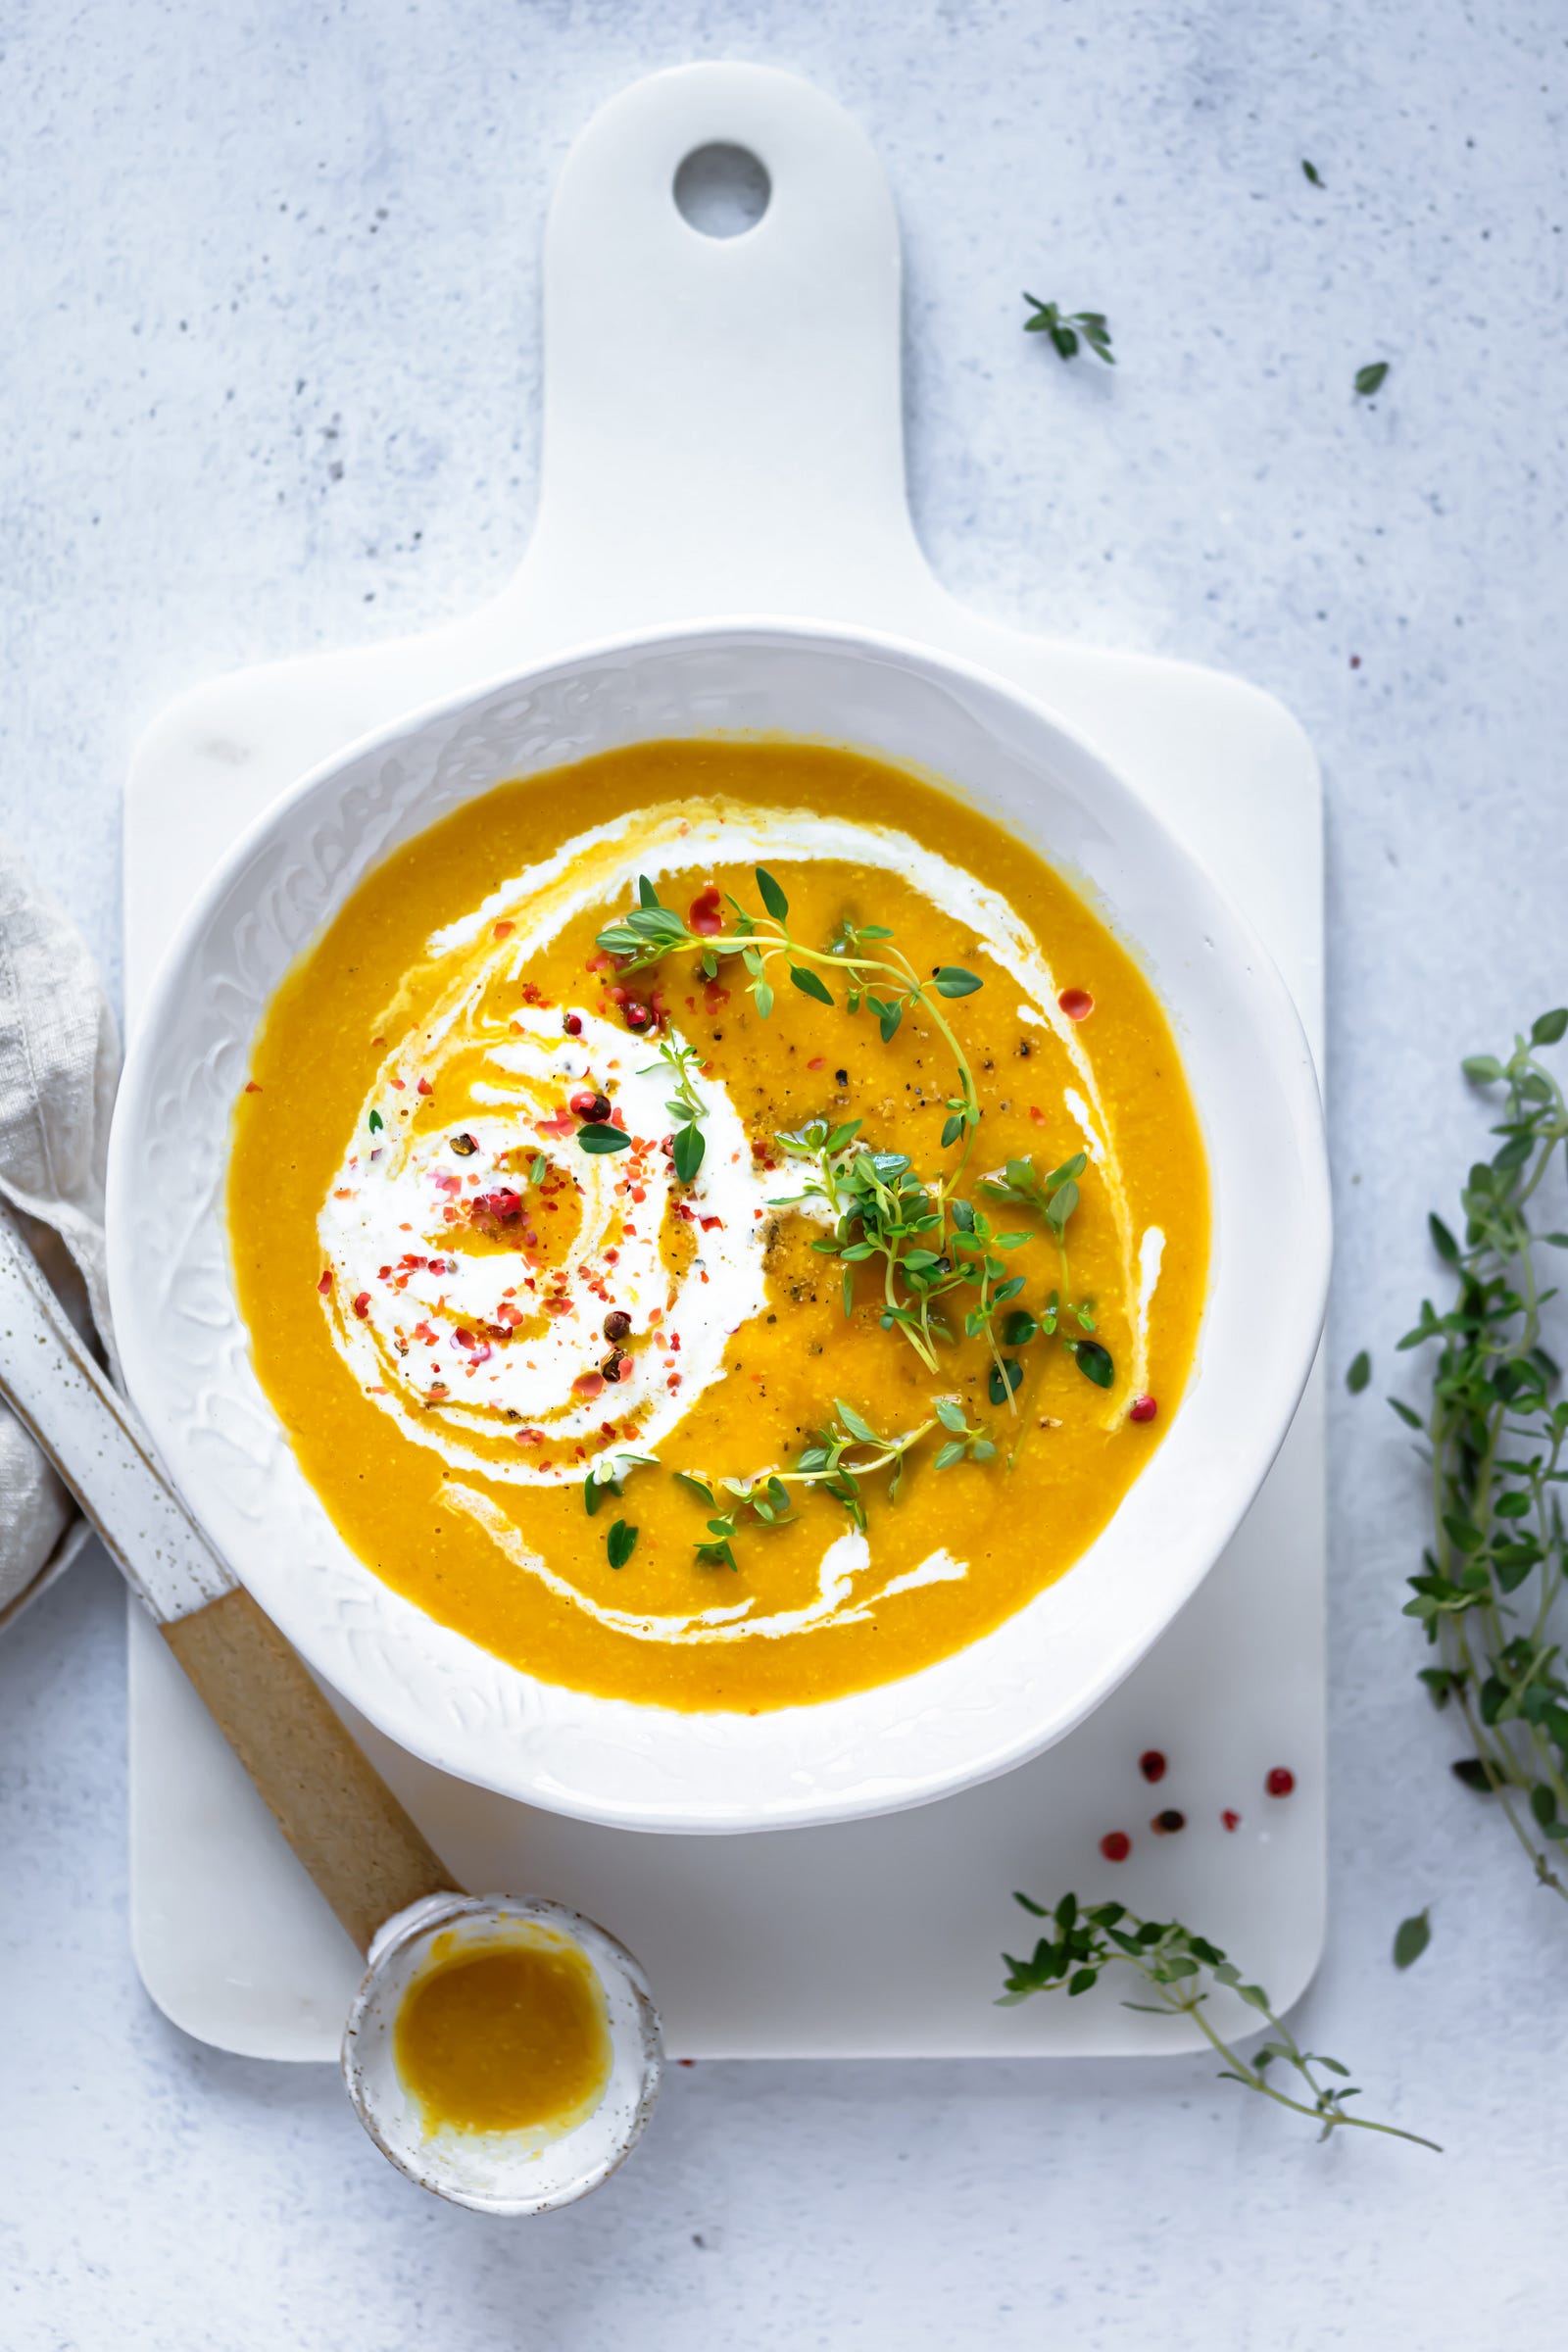 A bowl of pumpkin soup, with chives sprinkled on it. Superoxide dismutase (SOD) is an enzyme found in all of our living cells. An enzyme speeds up certain chemical reactions in the body. SOD helps break down potentially harmful oxygen molecules in cells.